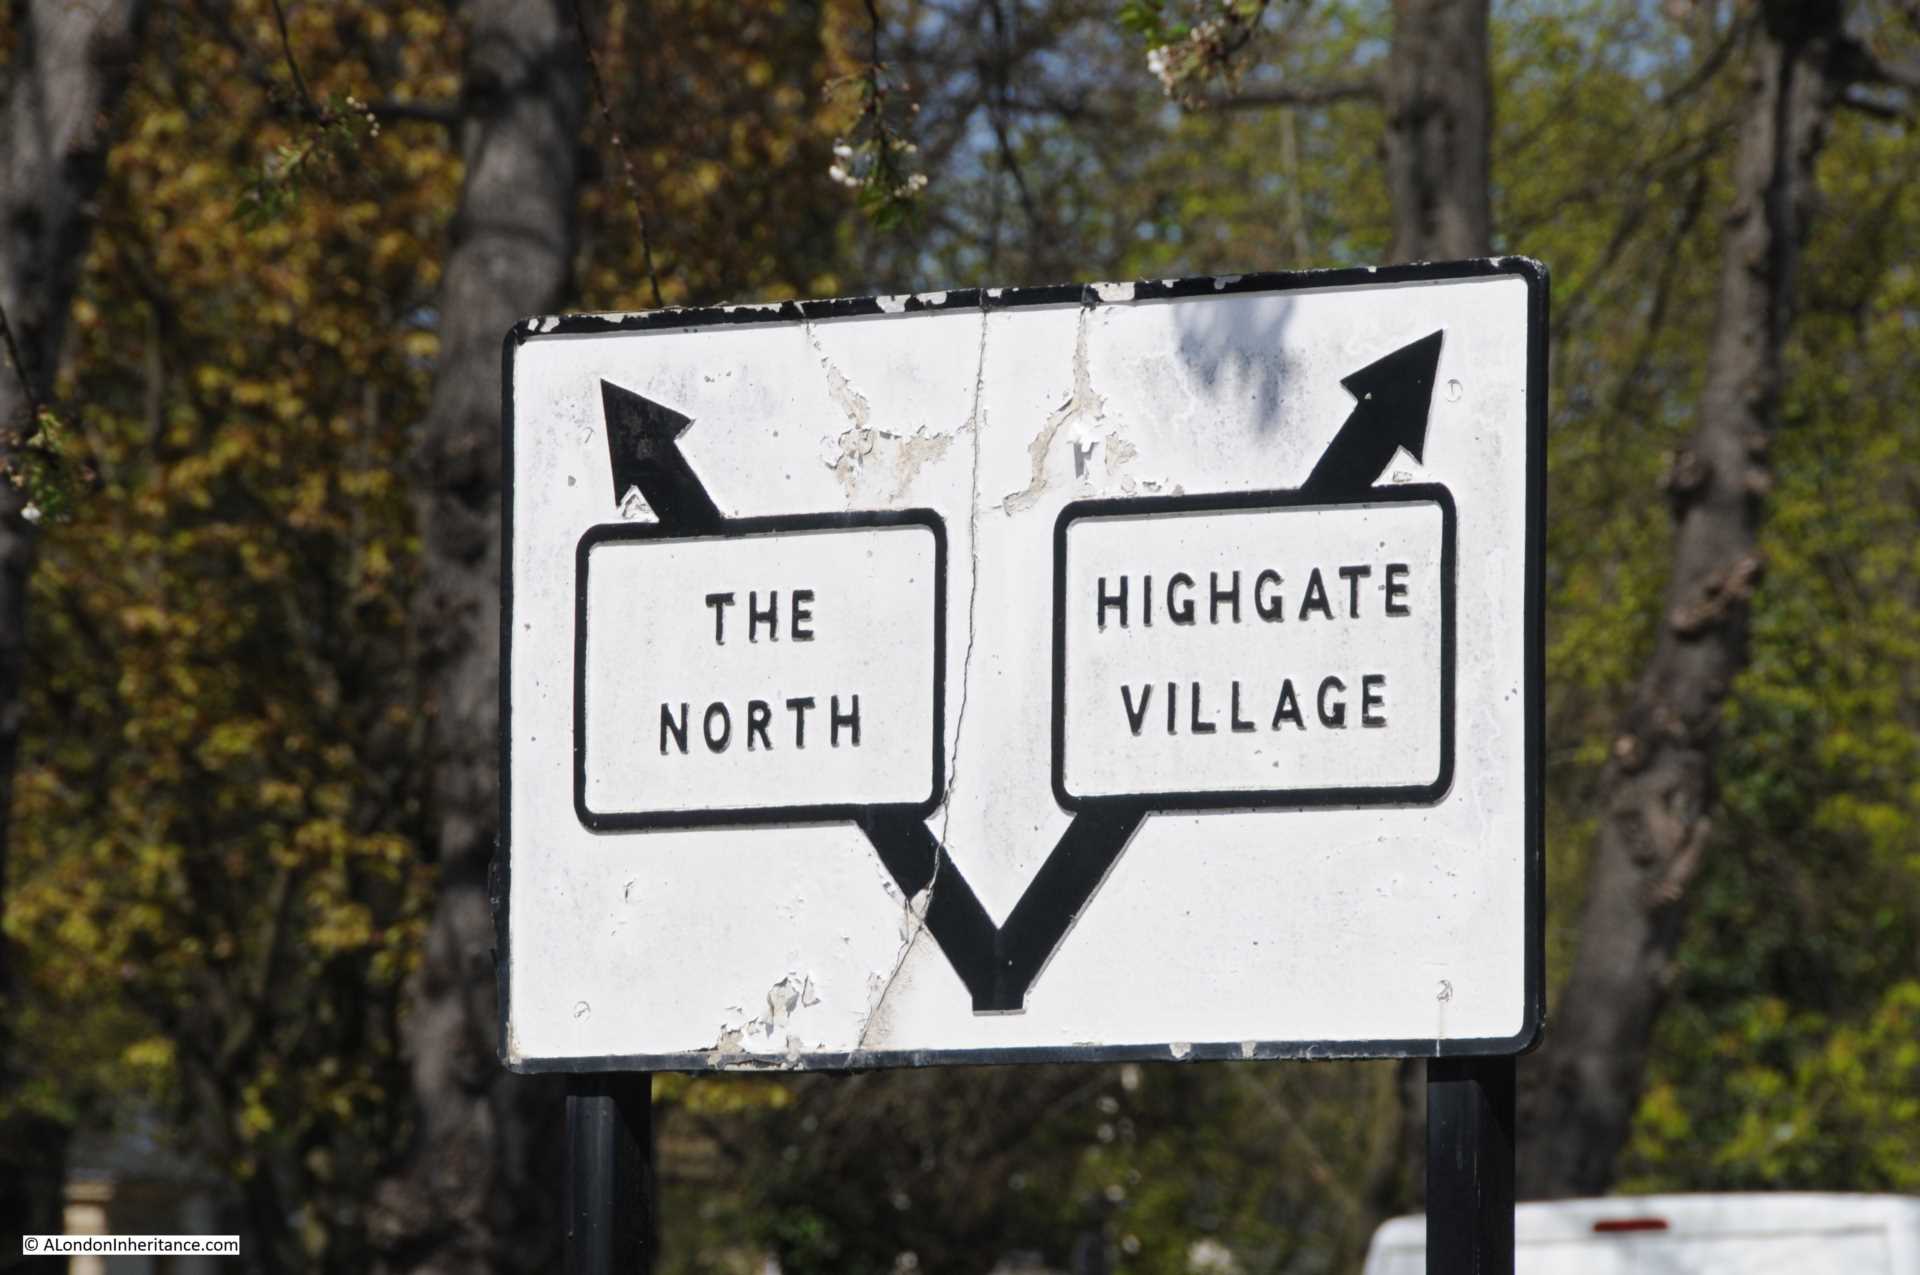 10 Reasons to Move to Highgate - Day 4 - Gateway in and out of the City